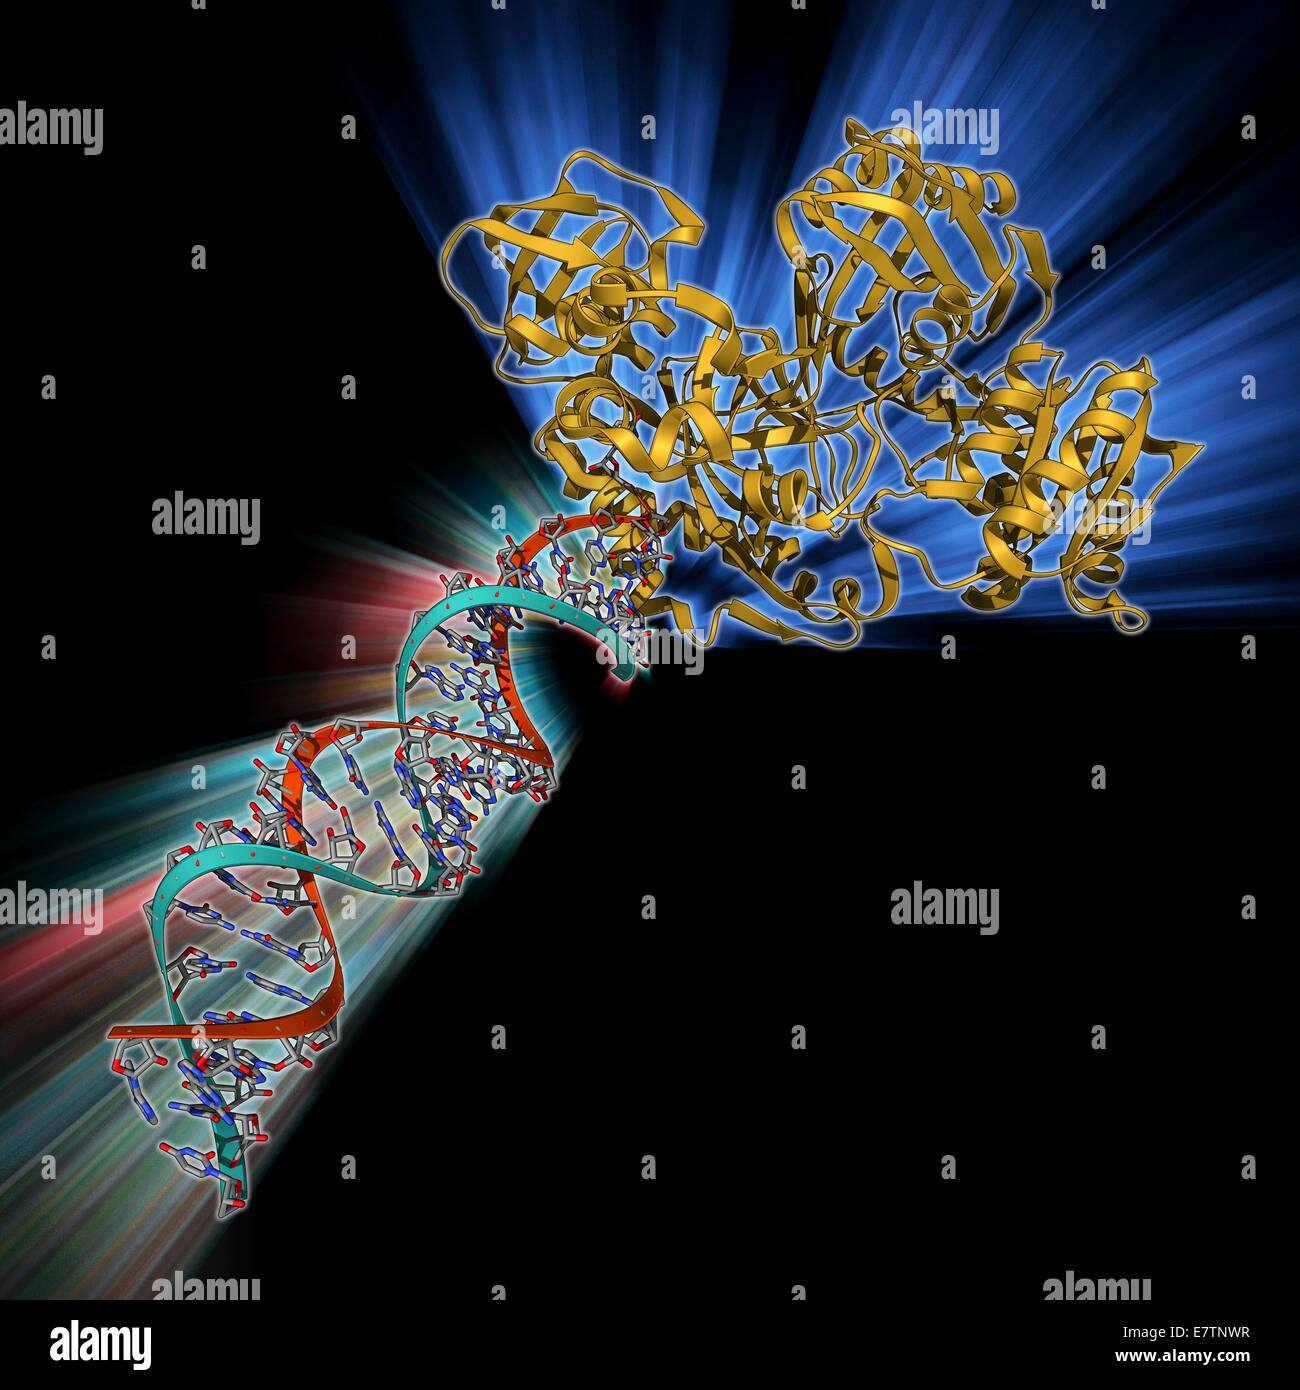 RNA-induced silencing complex (RISC), molecular model. This complex consists of a bacterial argonaute protein (top right) bound to a small interfering RNA (siRNA) molecule (red and blue). RISC is the multiprotein complex responsible for the gene silencing Stock Photo